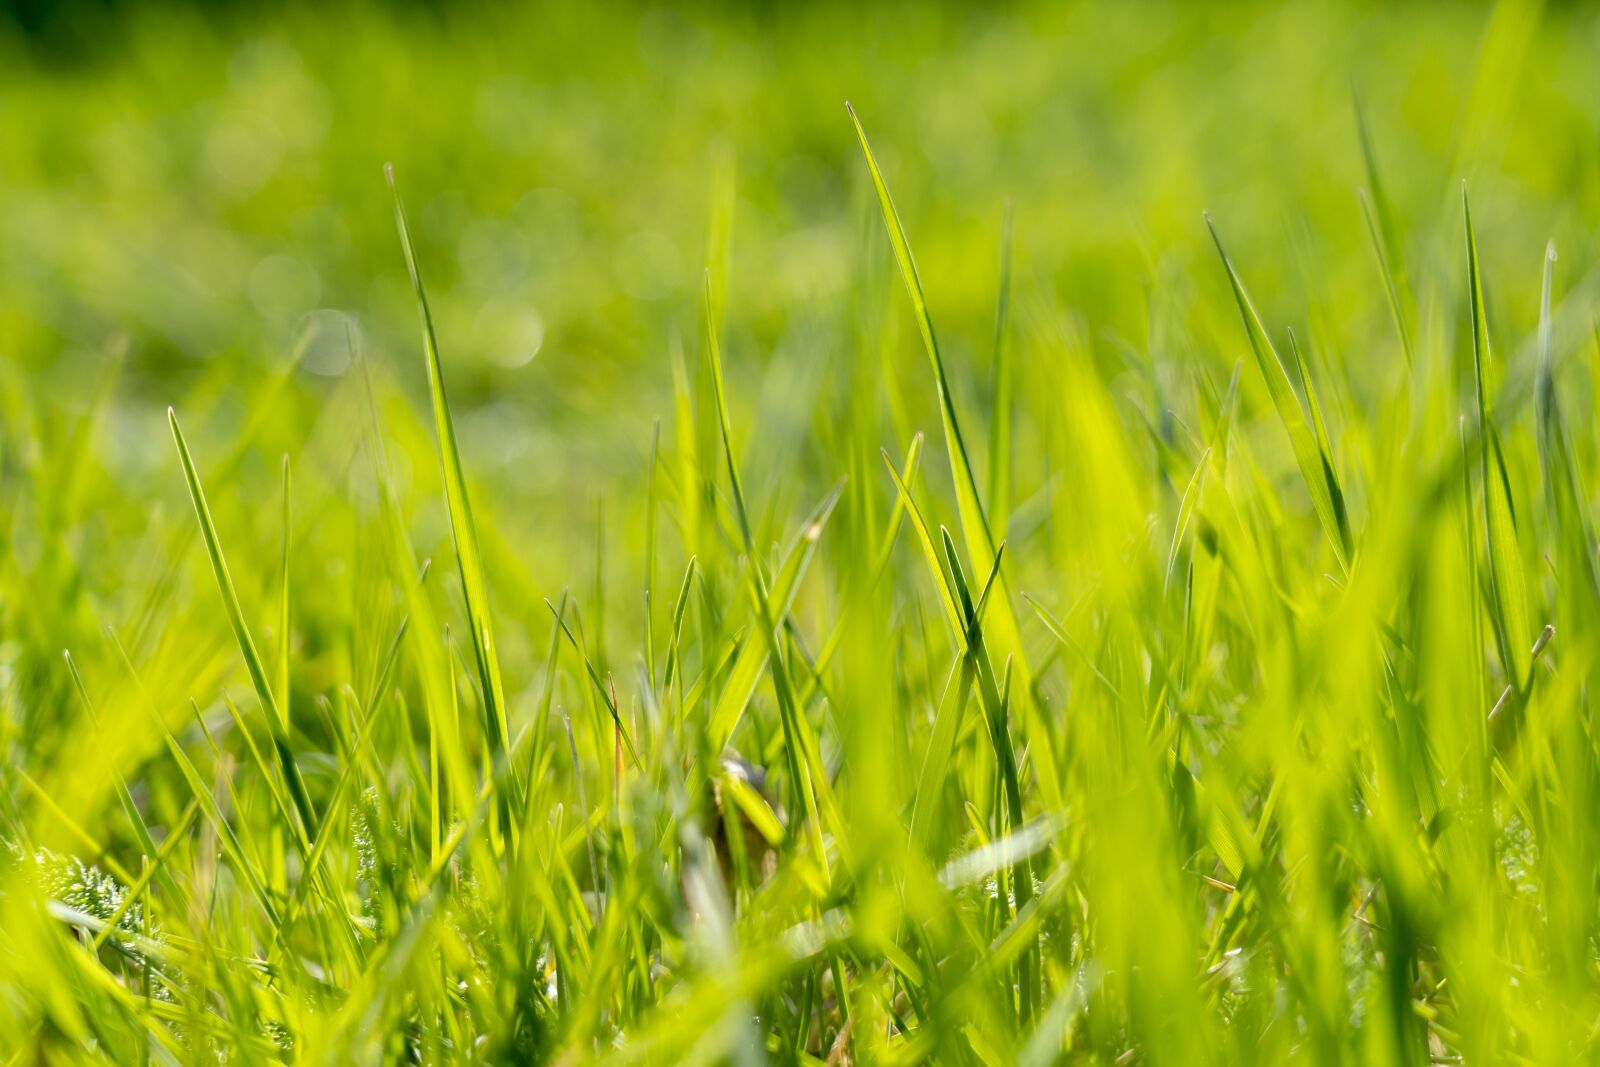 Sony a7 III sample photo. Grass, green, nature photography